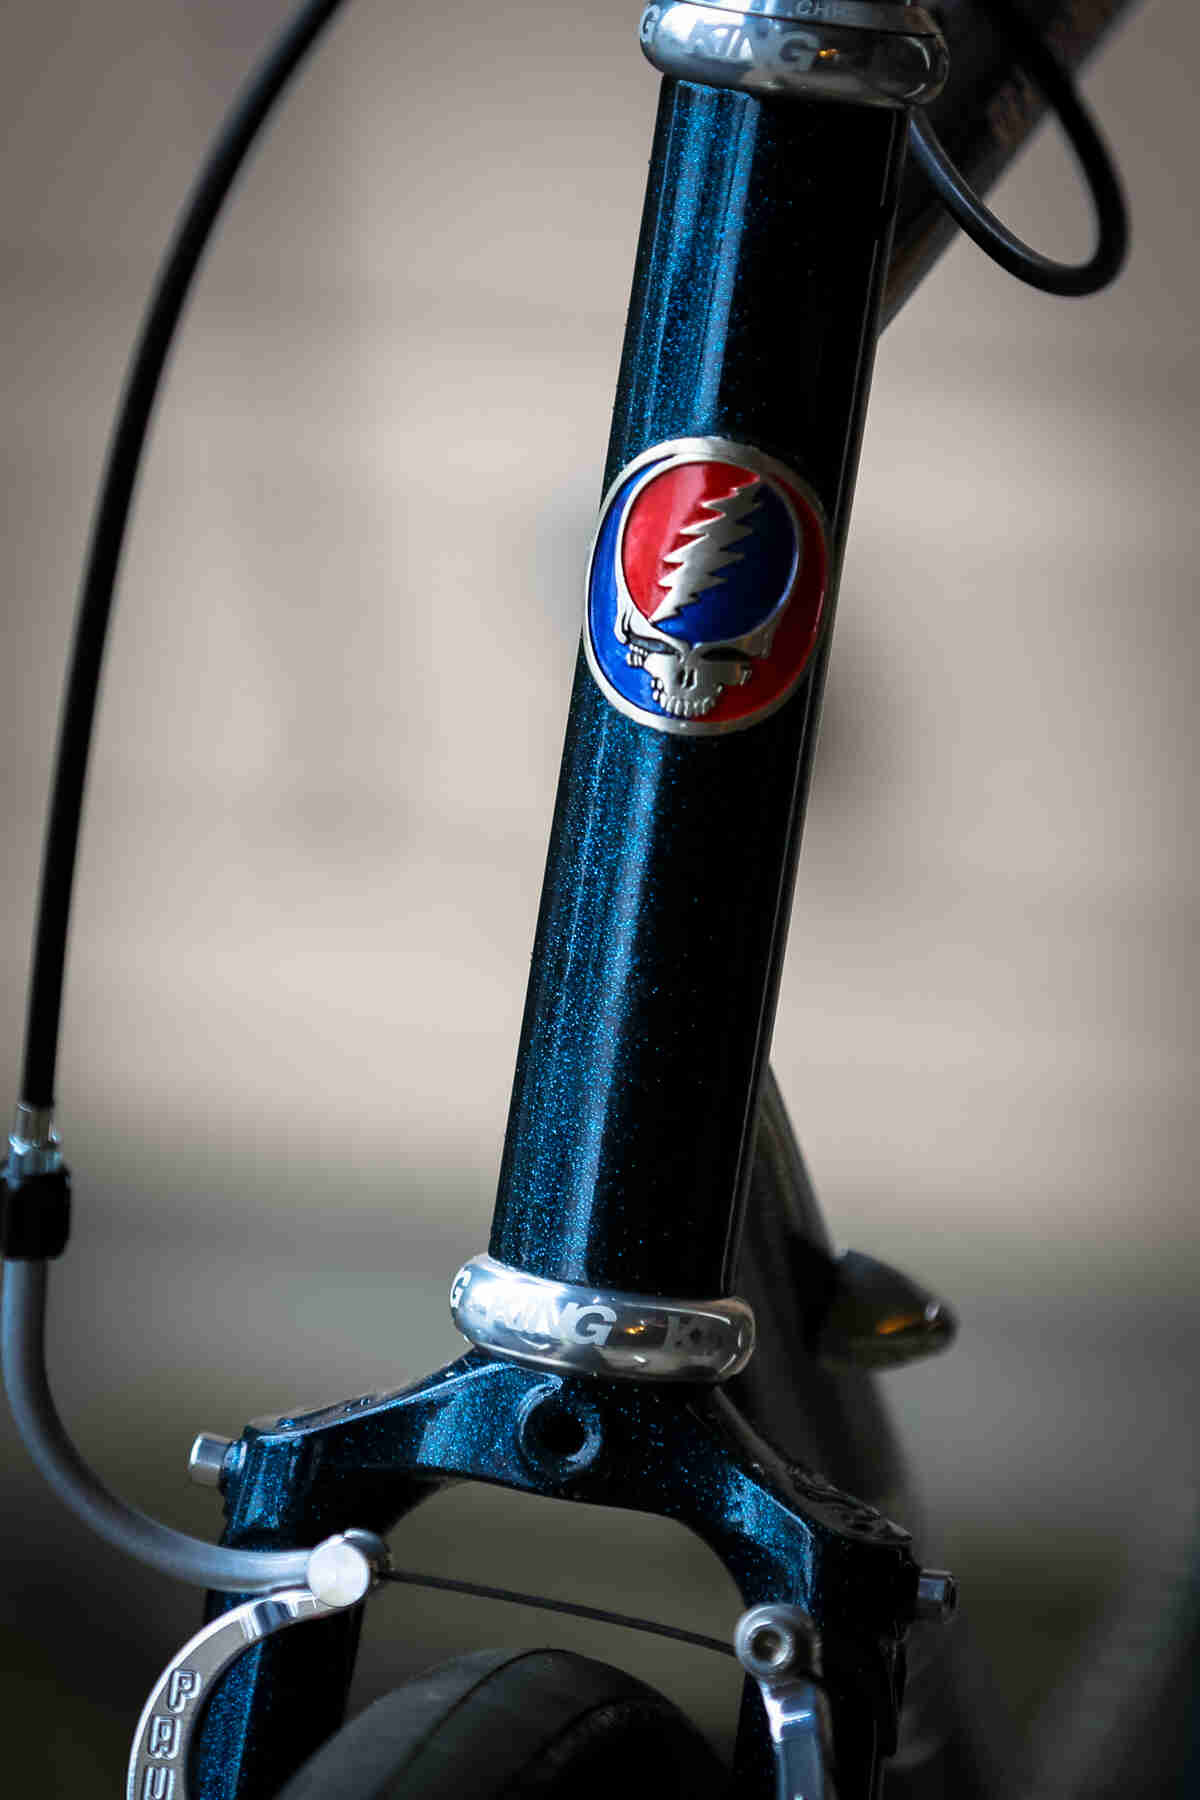 Surly Travelers Check bike - green - head tube with a Grateful Dead emblem detail - front view